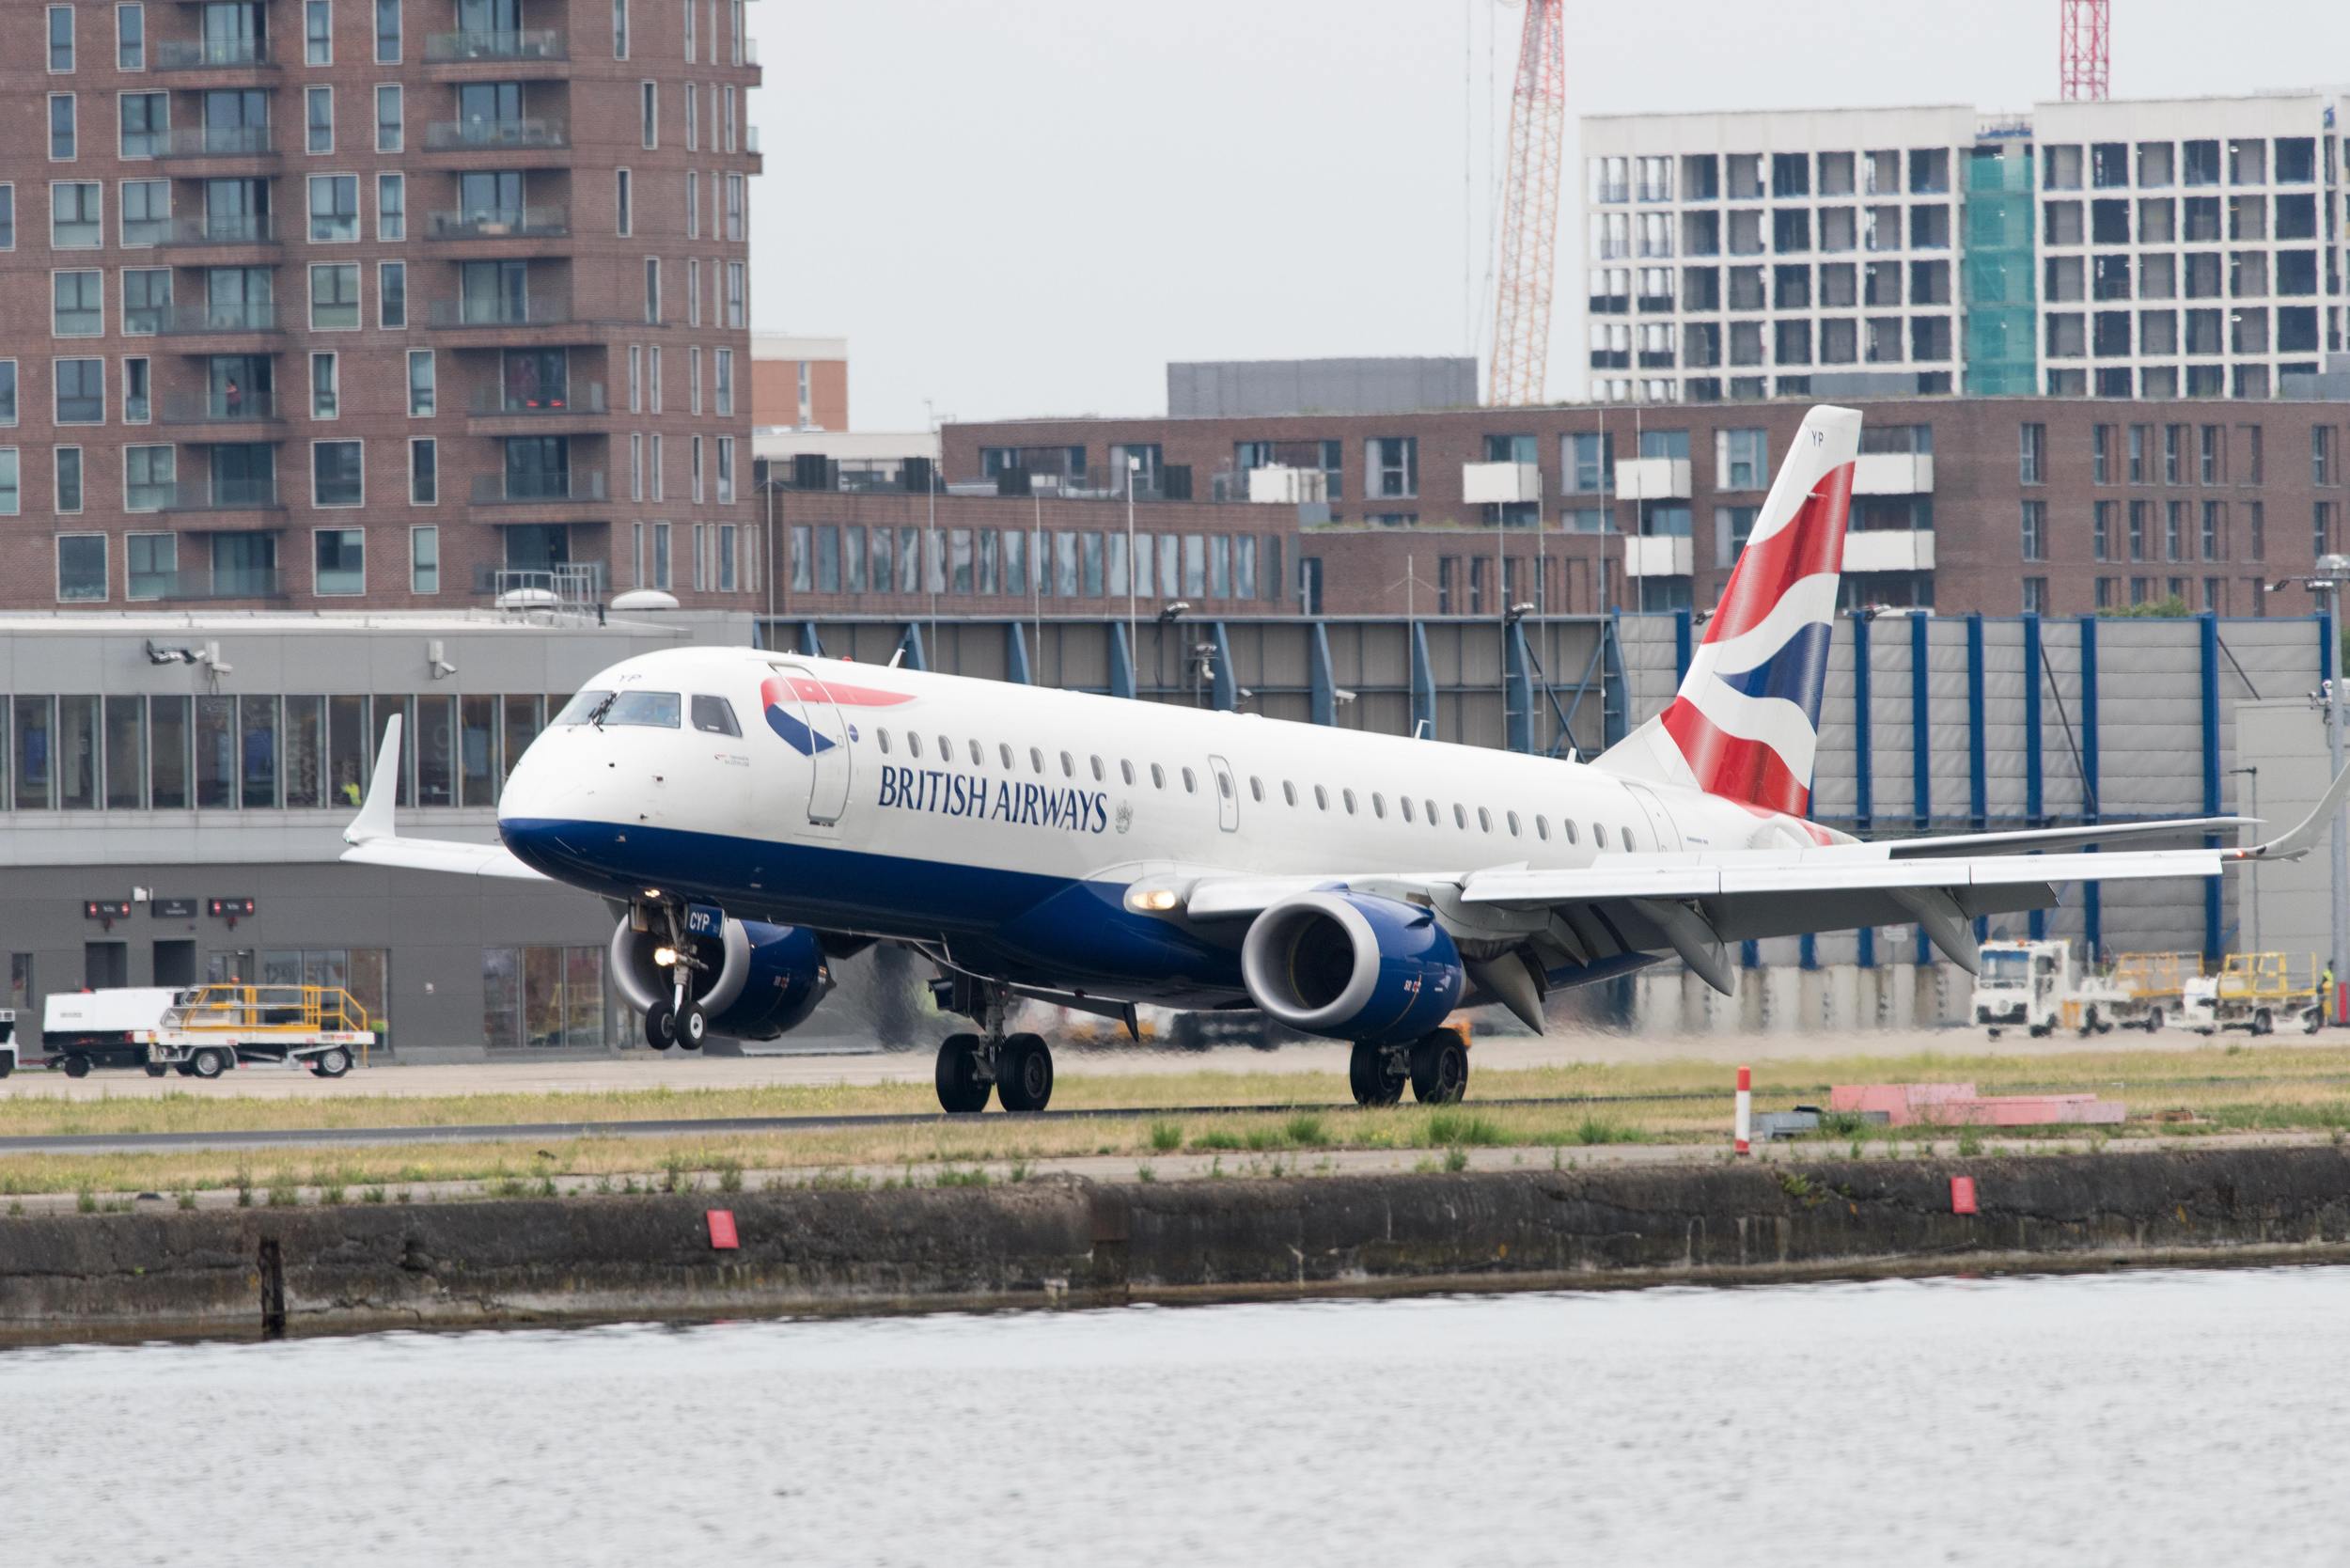 Step by Step Guide on How to Change Flights or Get Refunds on British Airways